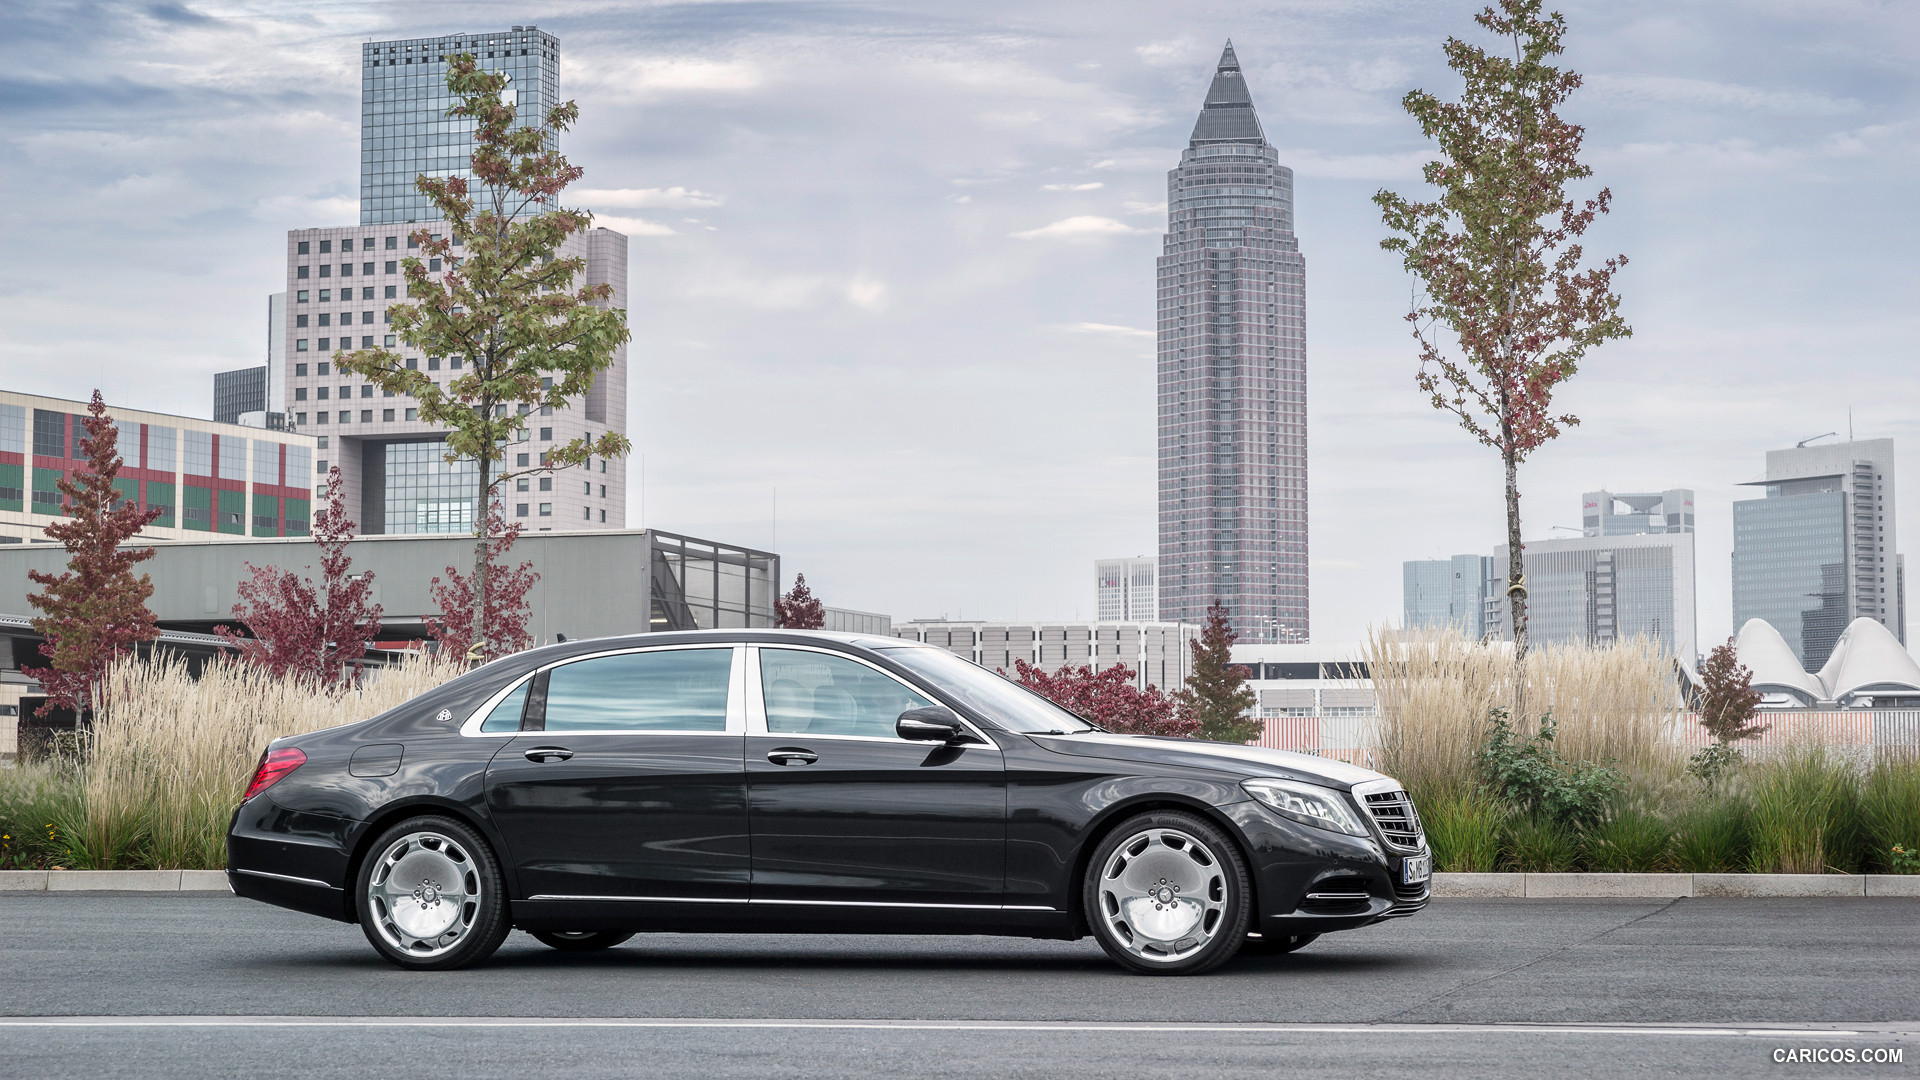 2016 Mercedes-Maybach S-Class S600 - Side, #20 of 225